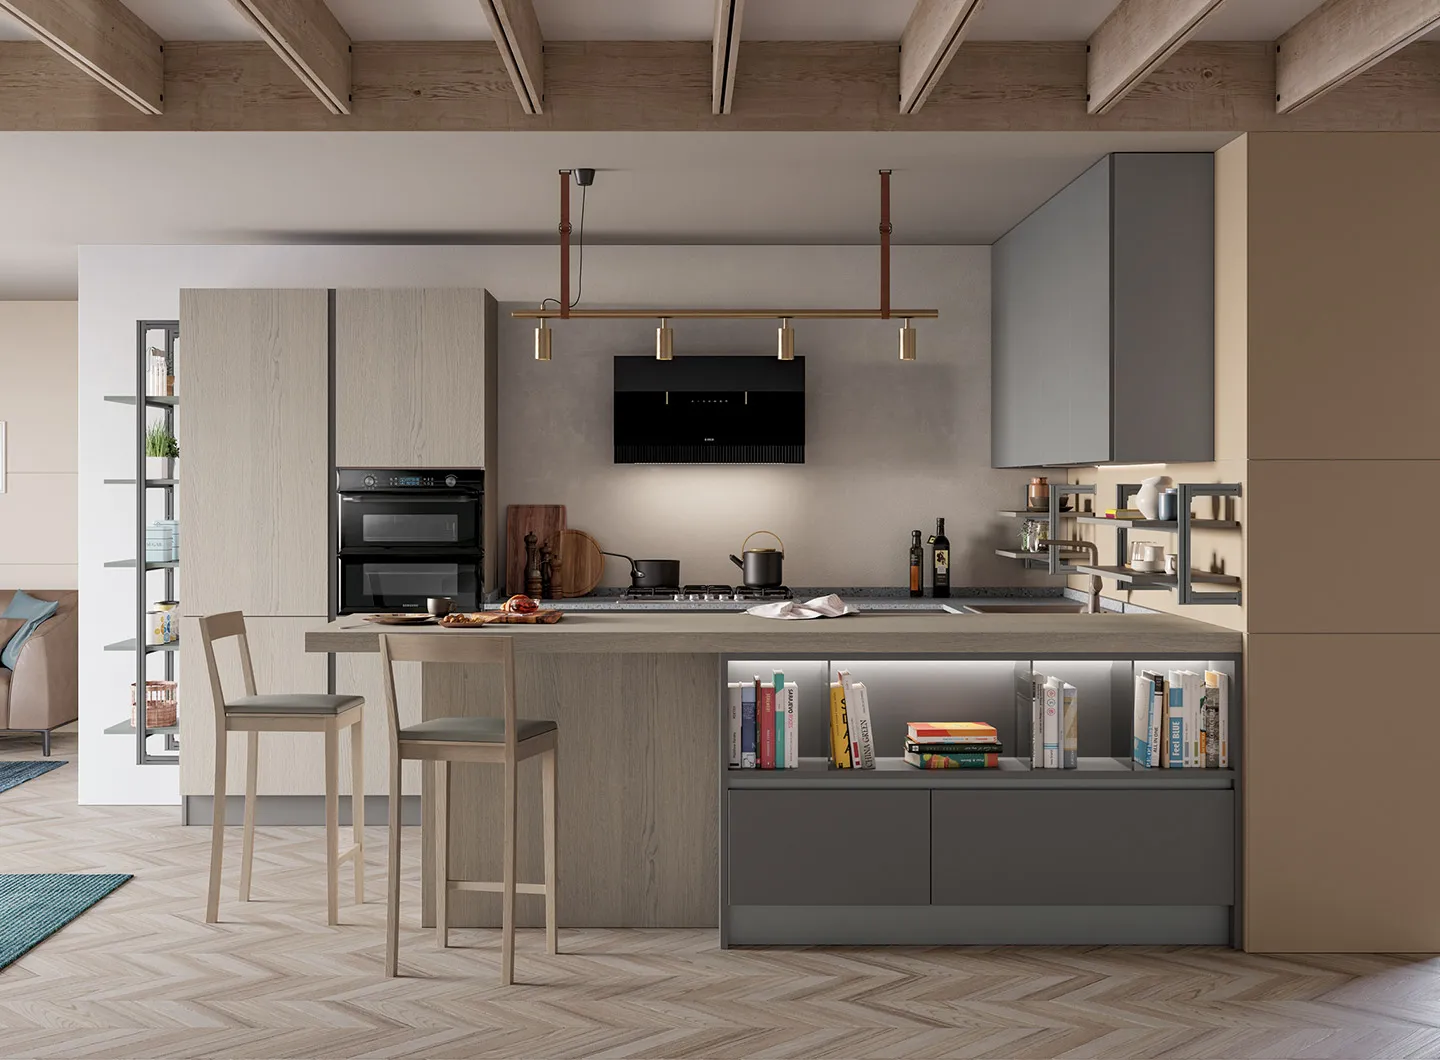 Tablet Wood Creo Kitchens